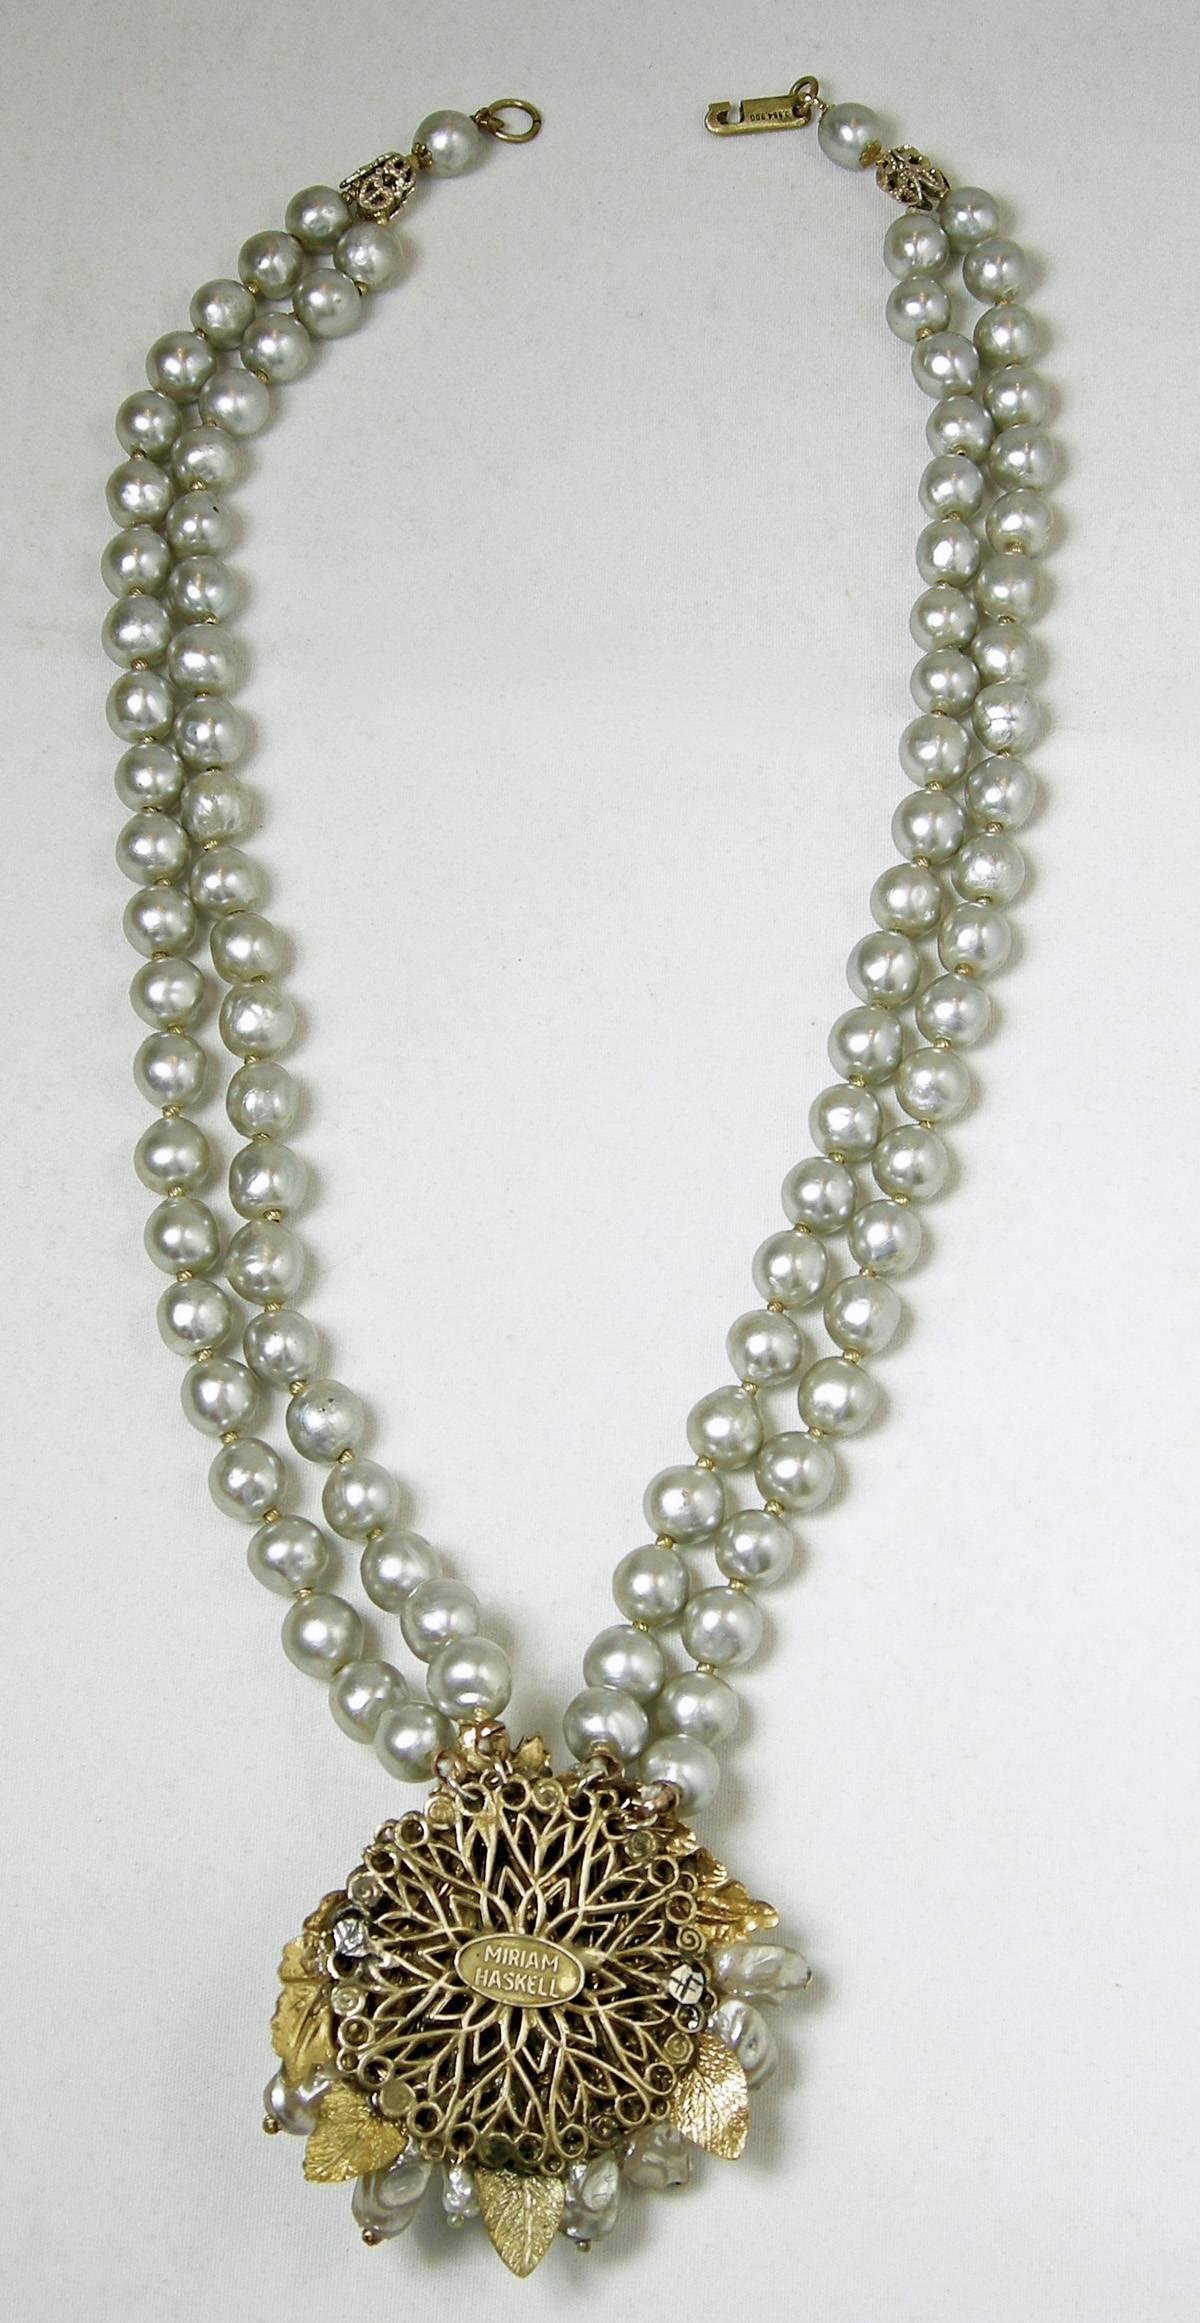 Vintage 1950s Signed Miriam Haskell Gray 2-Strand Faux Baroque Pearl Necklace 1